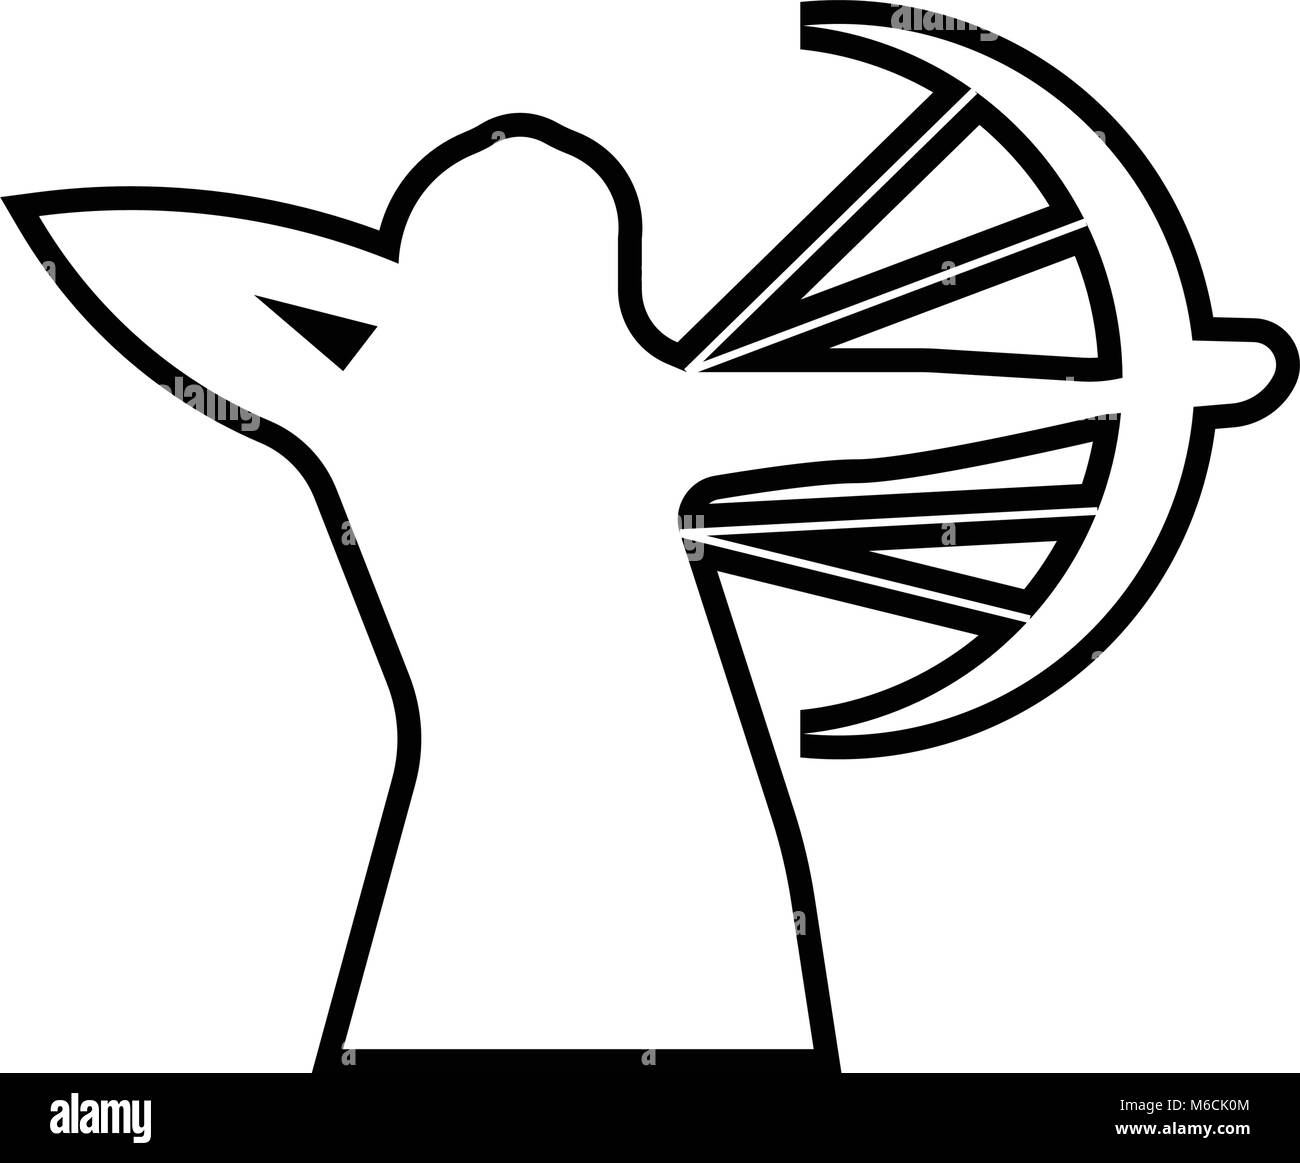 compound bow silhouette outline on white background Stock Vector